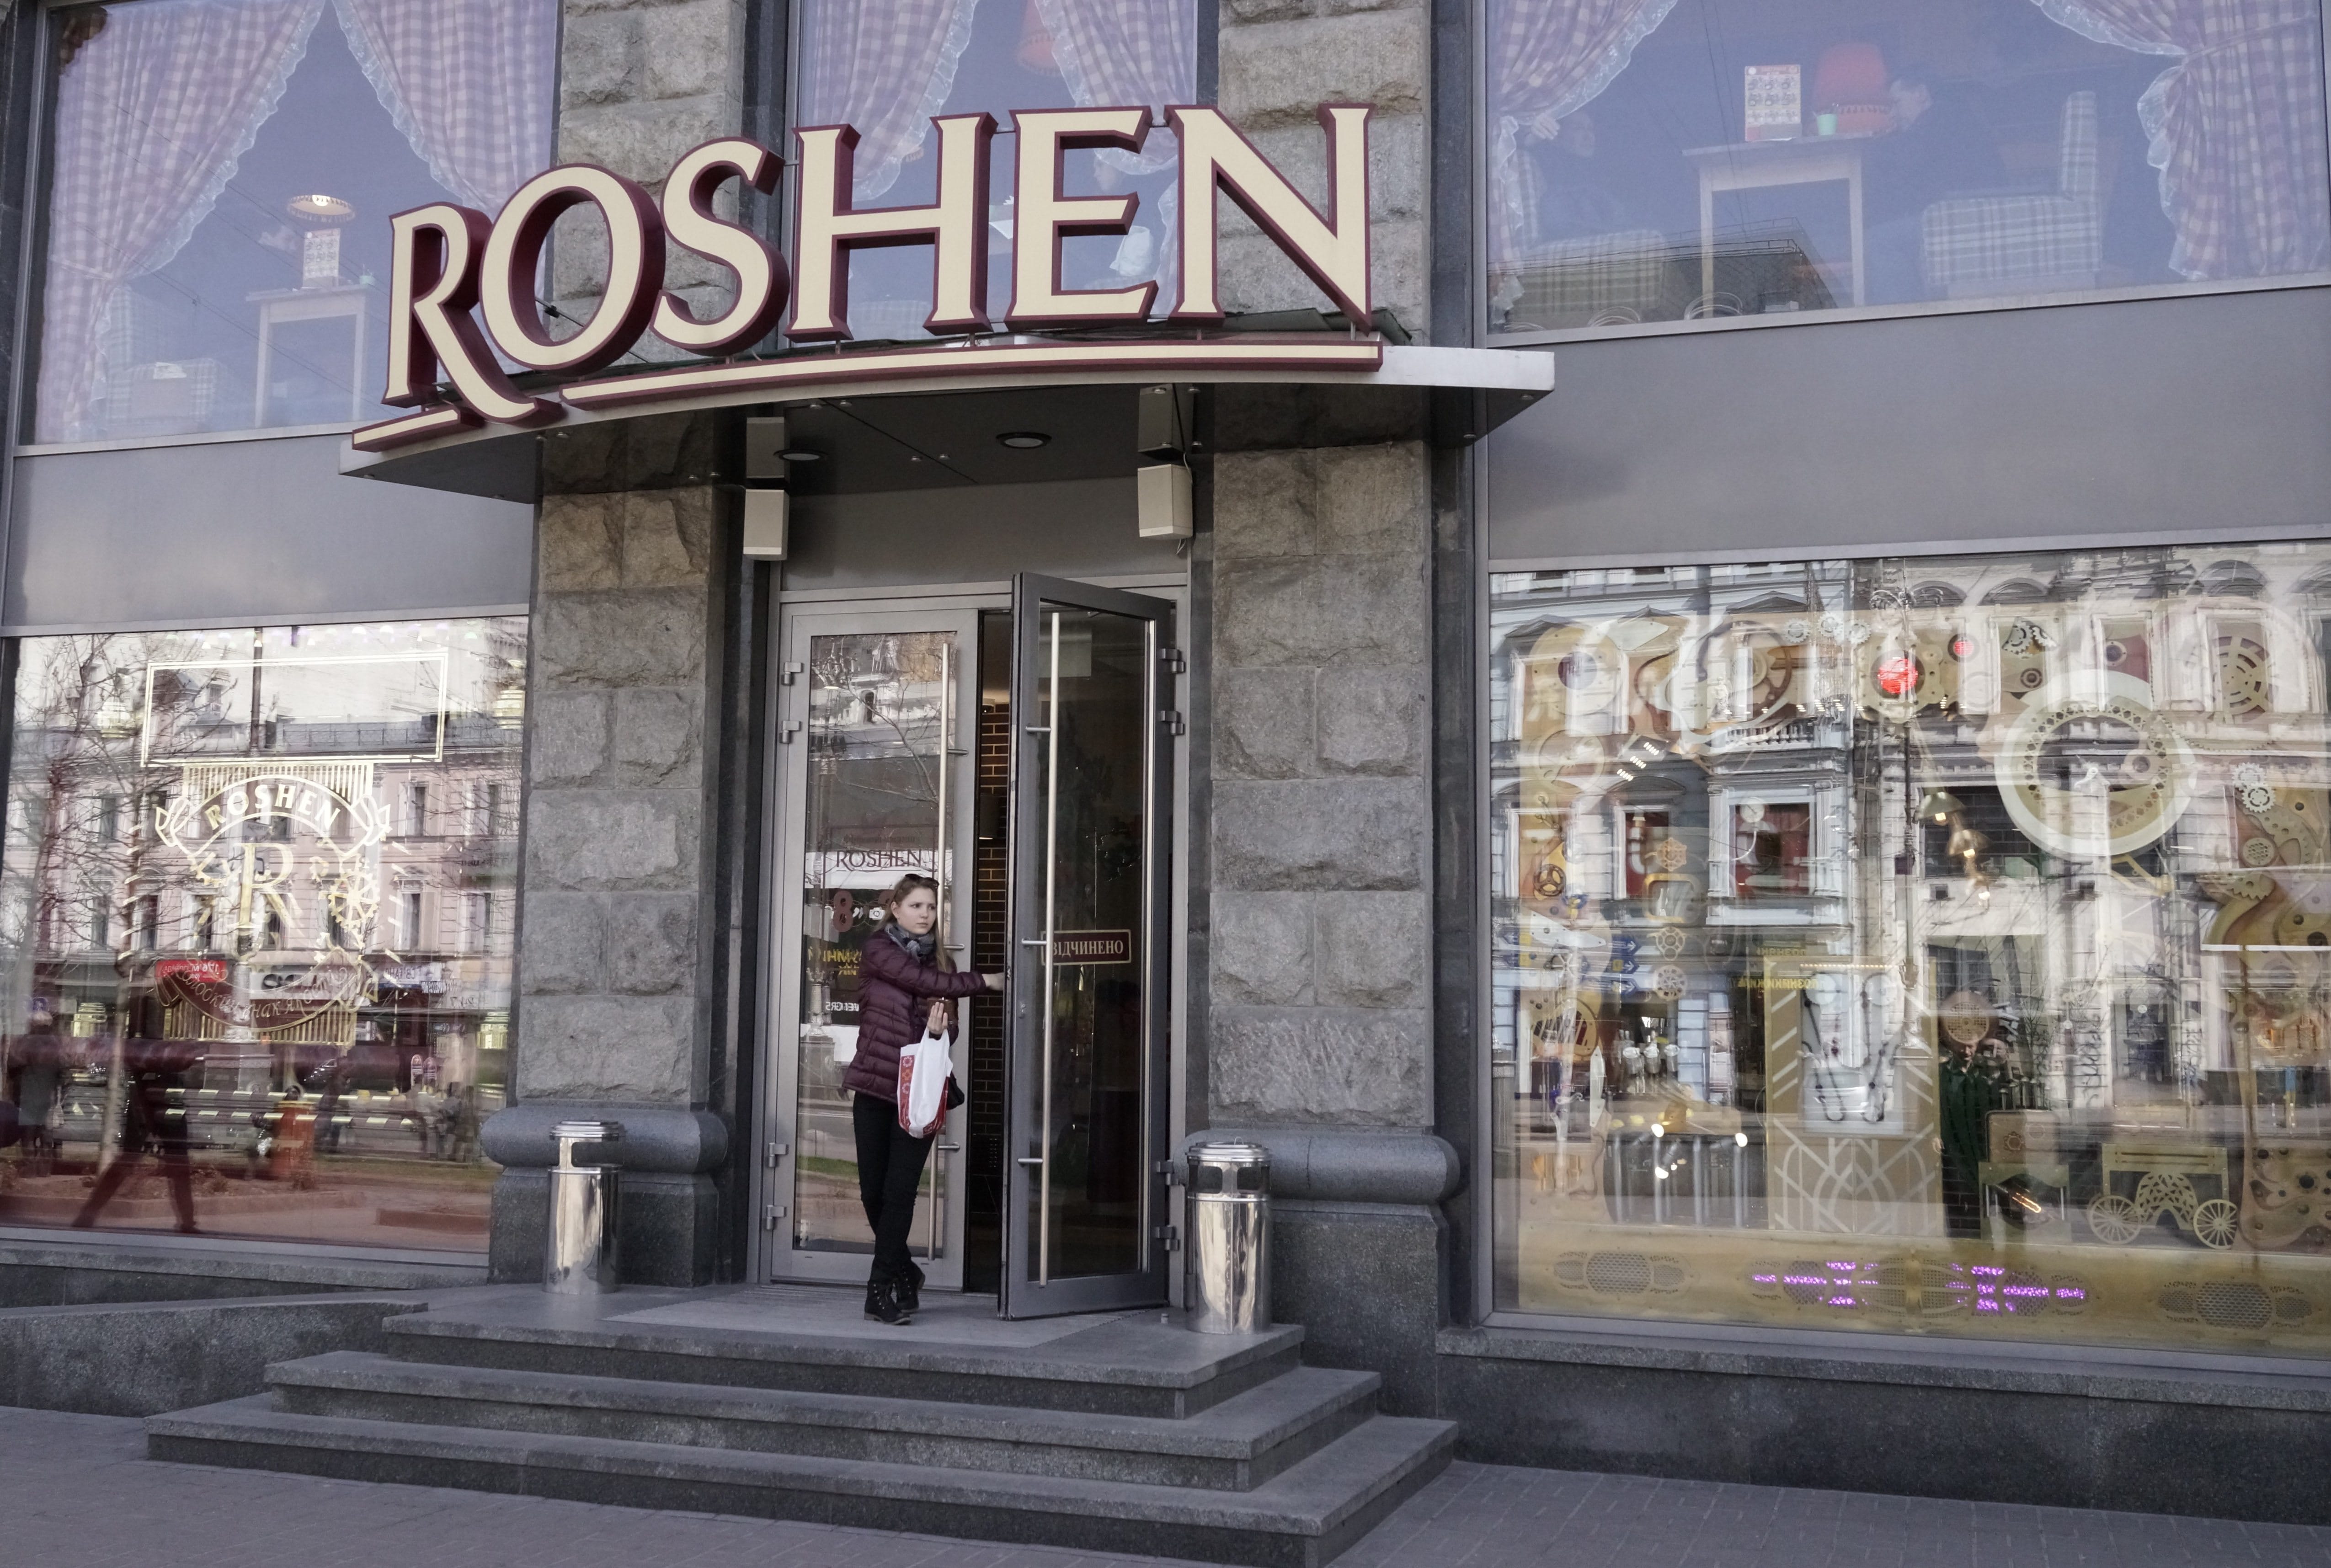 A woman exits a Roshen shop in Kiev, Ukraine, Monday, April 4, 2016. Poroshenko has found himself amid a perfect political storm over the leaked documents from a Panamanian firm pointing at his offshore assets, with some of his political adversaries calling for his removal from office. Ukrainian President Petro Poroshenko?s advisers have insisted that the offshore business was part of corporate restructuring intended to facilitate the eventual sale of Roshen assets.